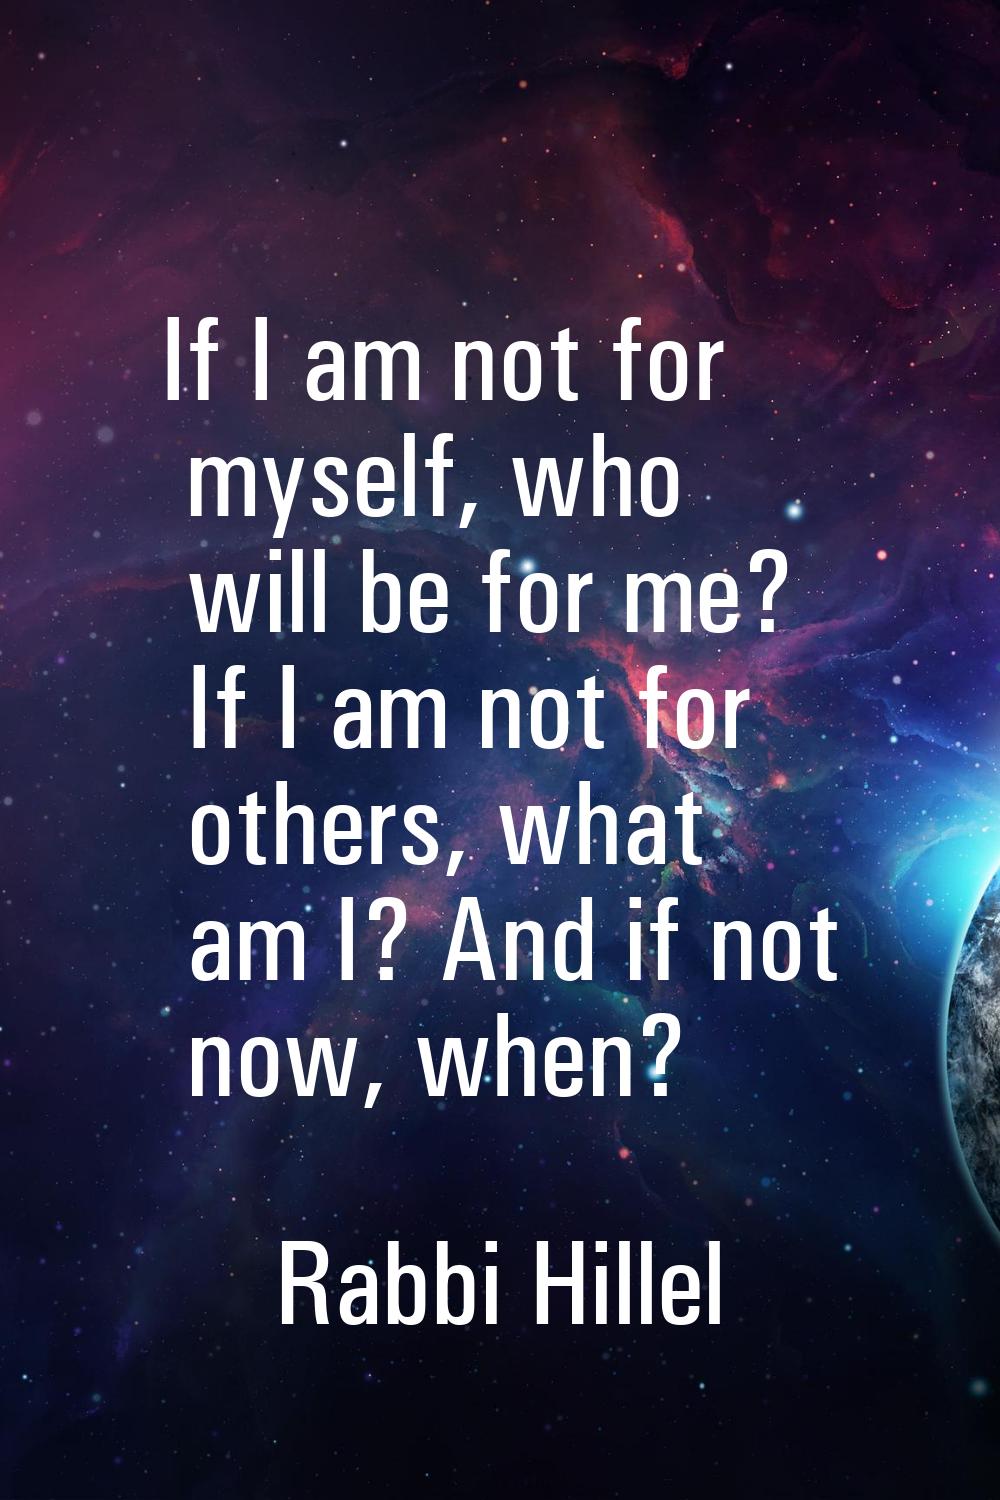 If I am not for myself, who will be for me? If I am not for others, what am I? And if not now, when